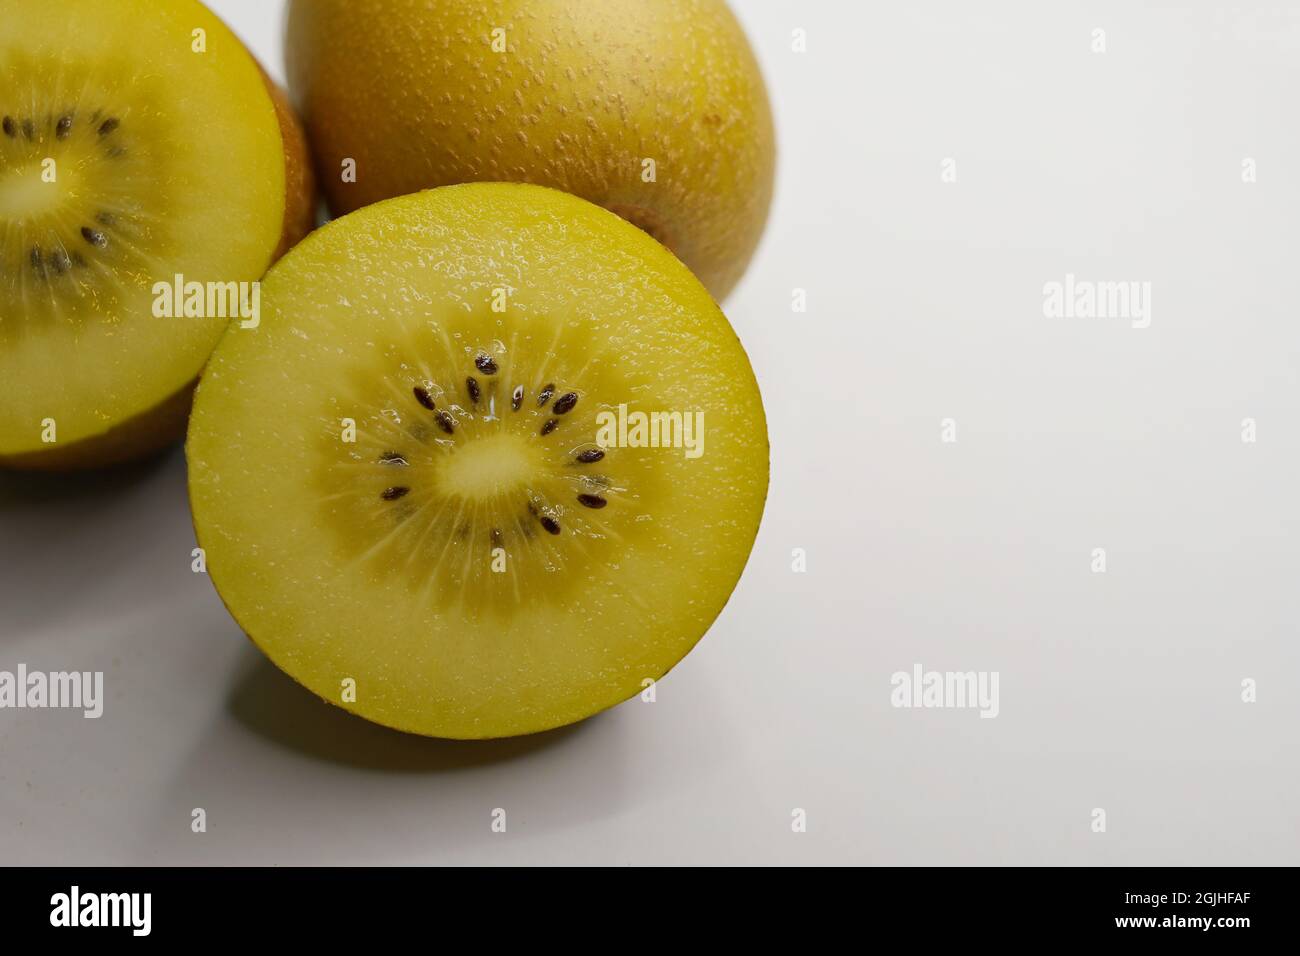 A Golden Kiwifruit or Chinese gooseberry (Actinidia chinensis) cut crosswise and a whole berry on white background Stock Photo